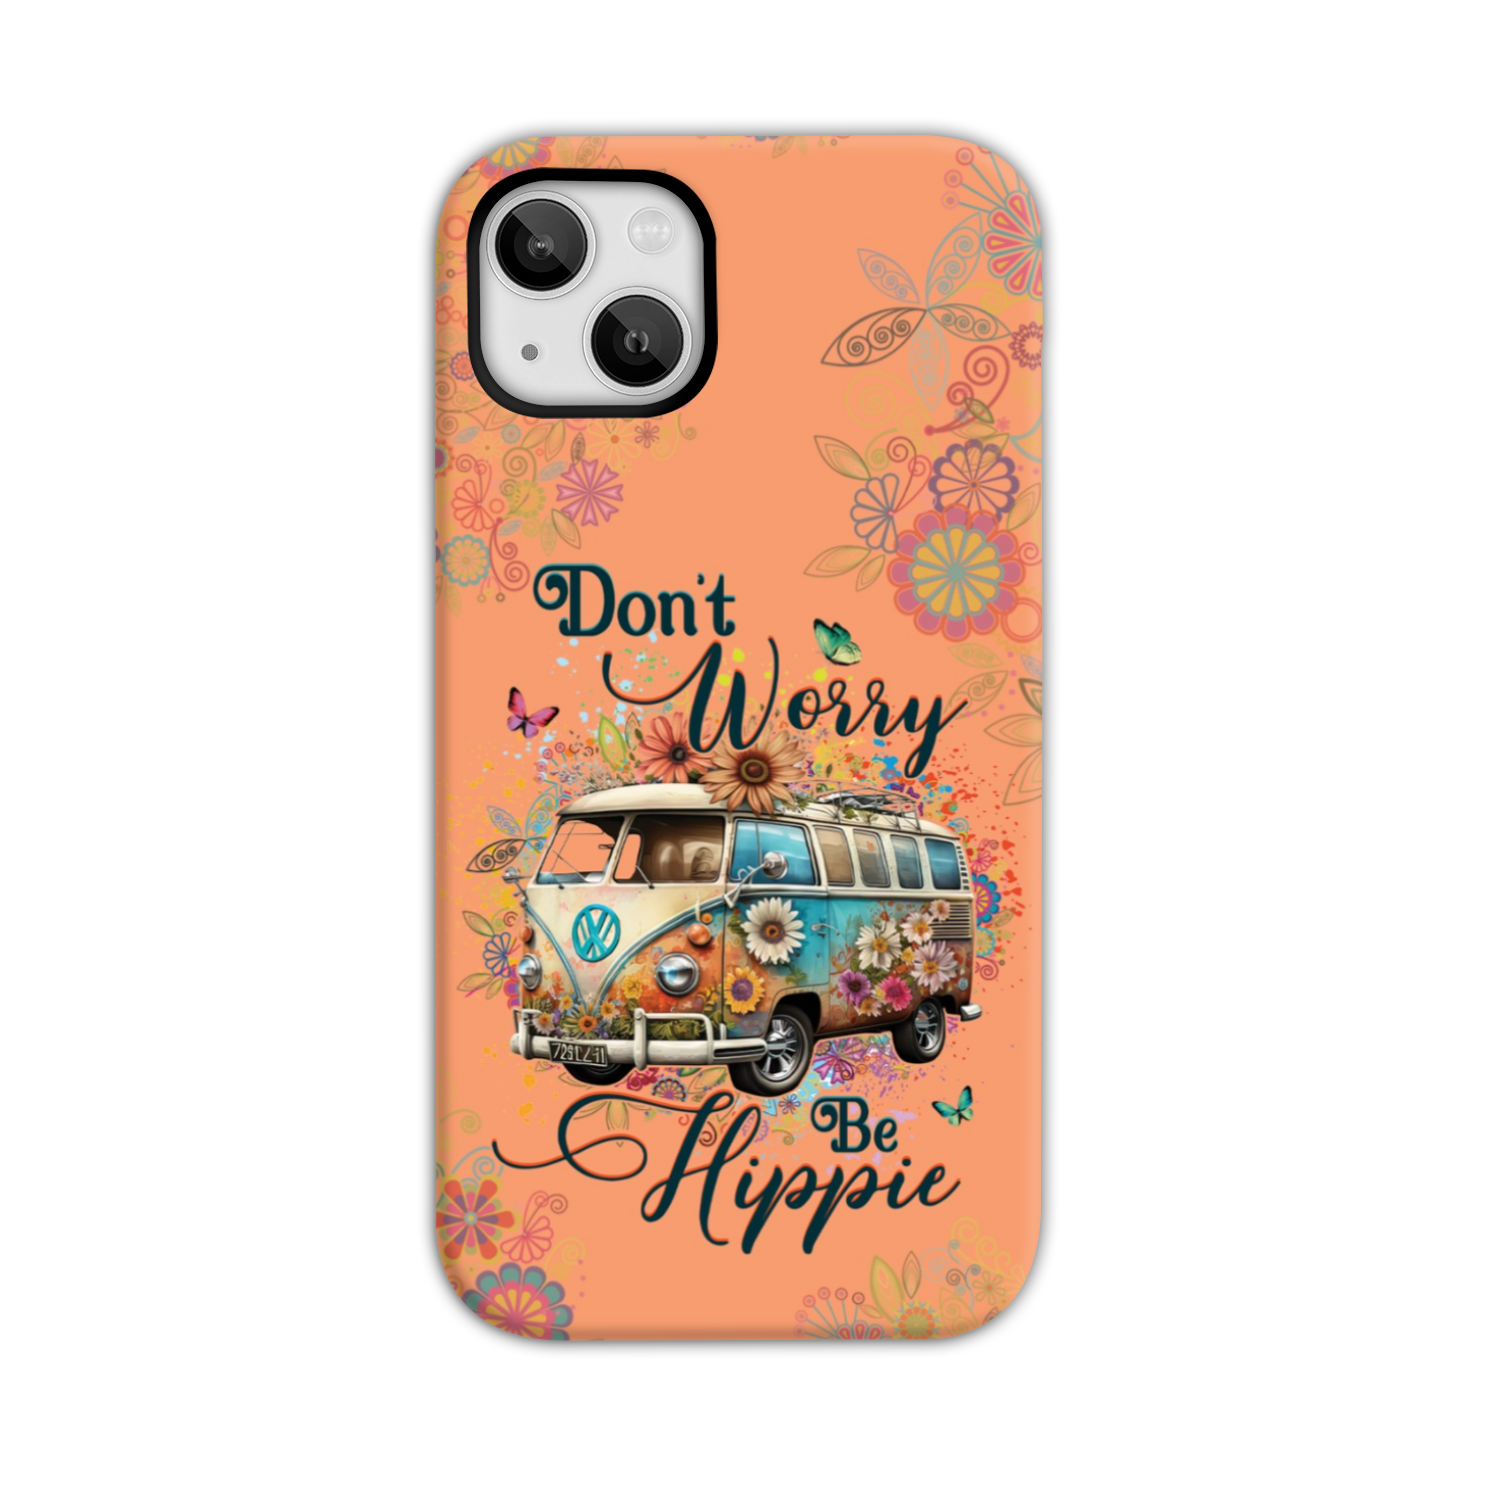 DON'T WORRY BE HIPPIE PHONE CASE - YHHG0103234